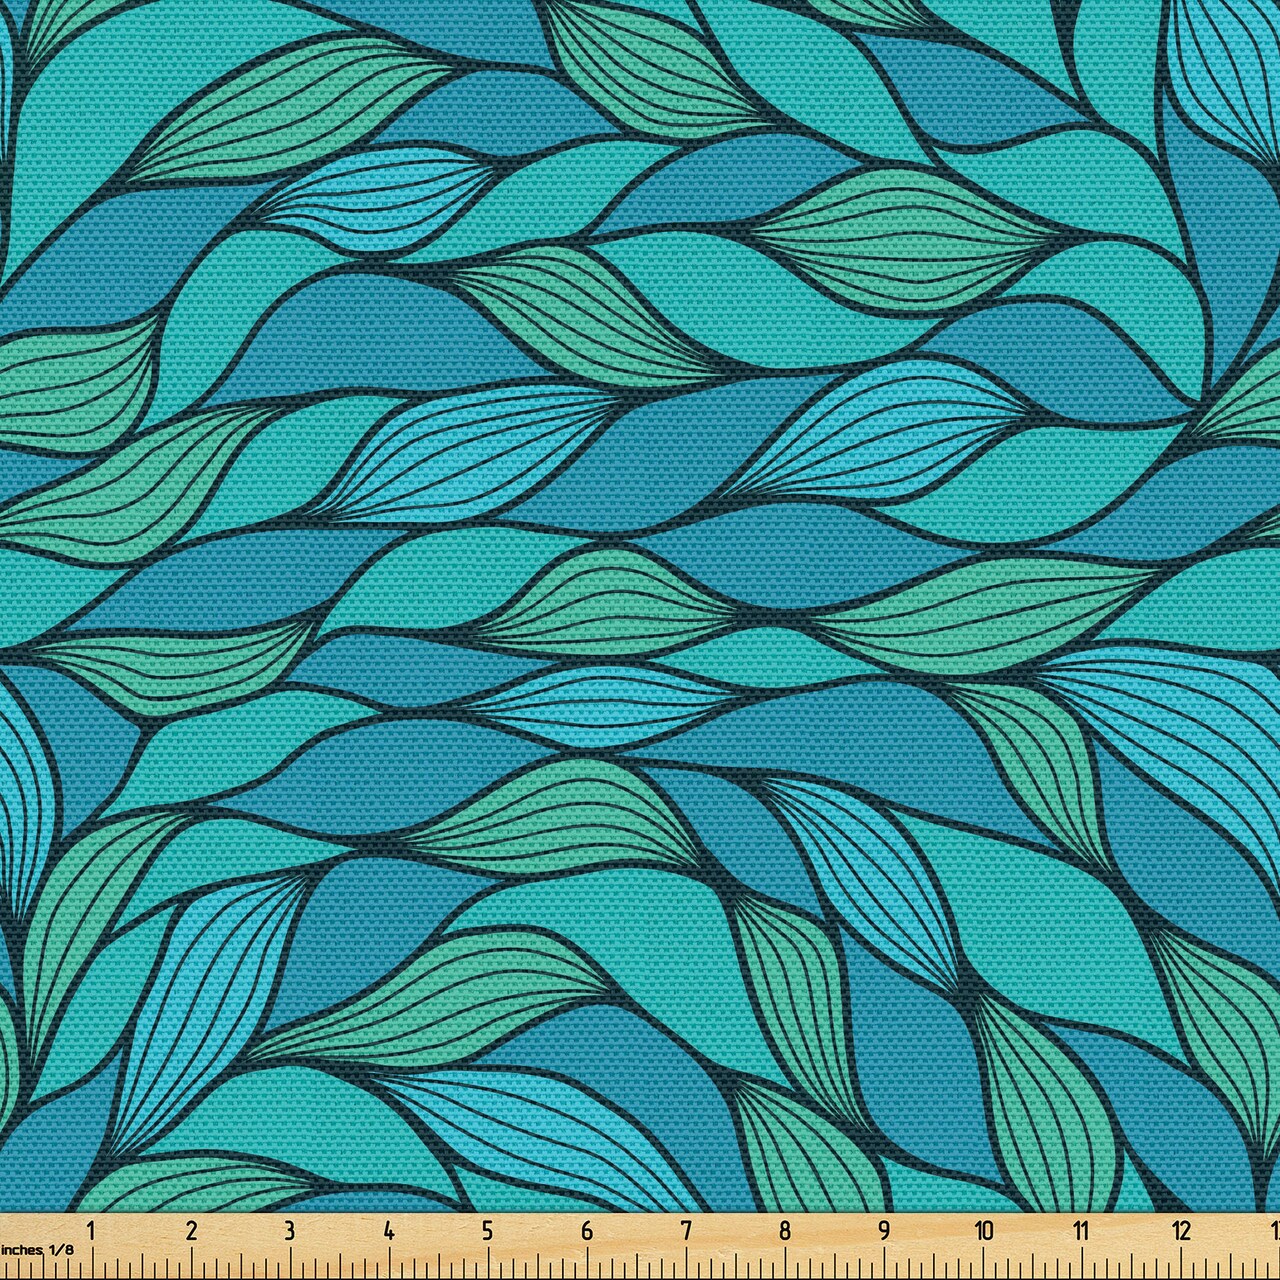 Ambesonne Teal Fabric by the Yard, Abstract Wave Design with Colorful Design Ocean Themed Marine Life Pattern Print, Decorative Fabric for Upholstery and Home Accents, 3 Yards, Mint Green Blue